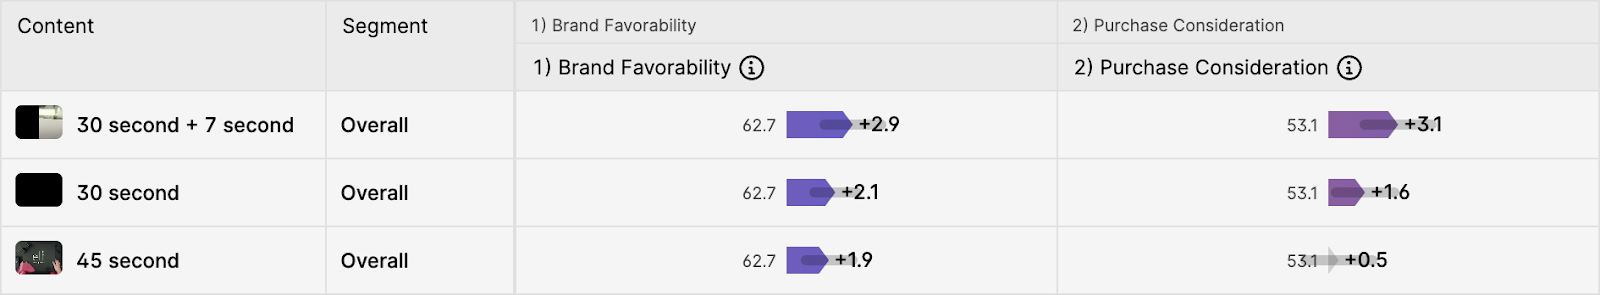 A Swayable dashboard comparing Brand Favorability & Purchase Consideration results for 45 second, 30 second, and 30 second + 7 second back-to-back exposure ads.